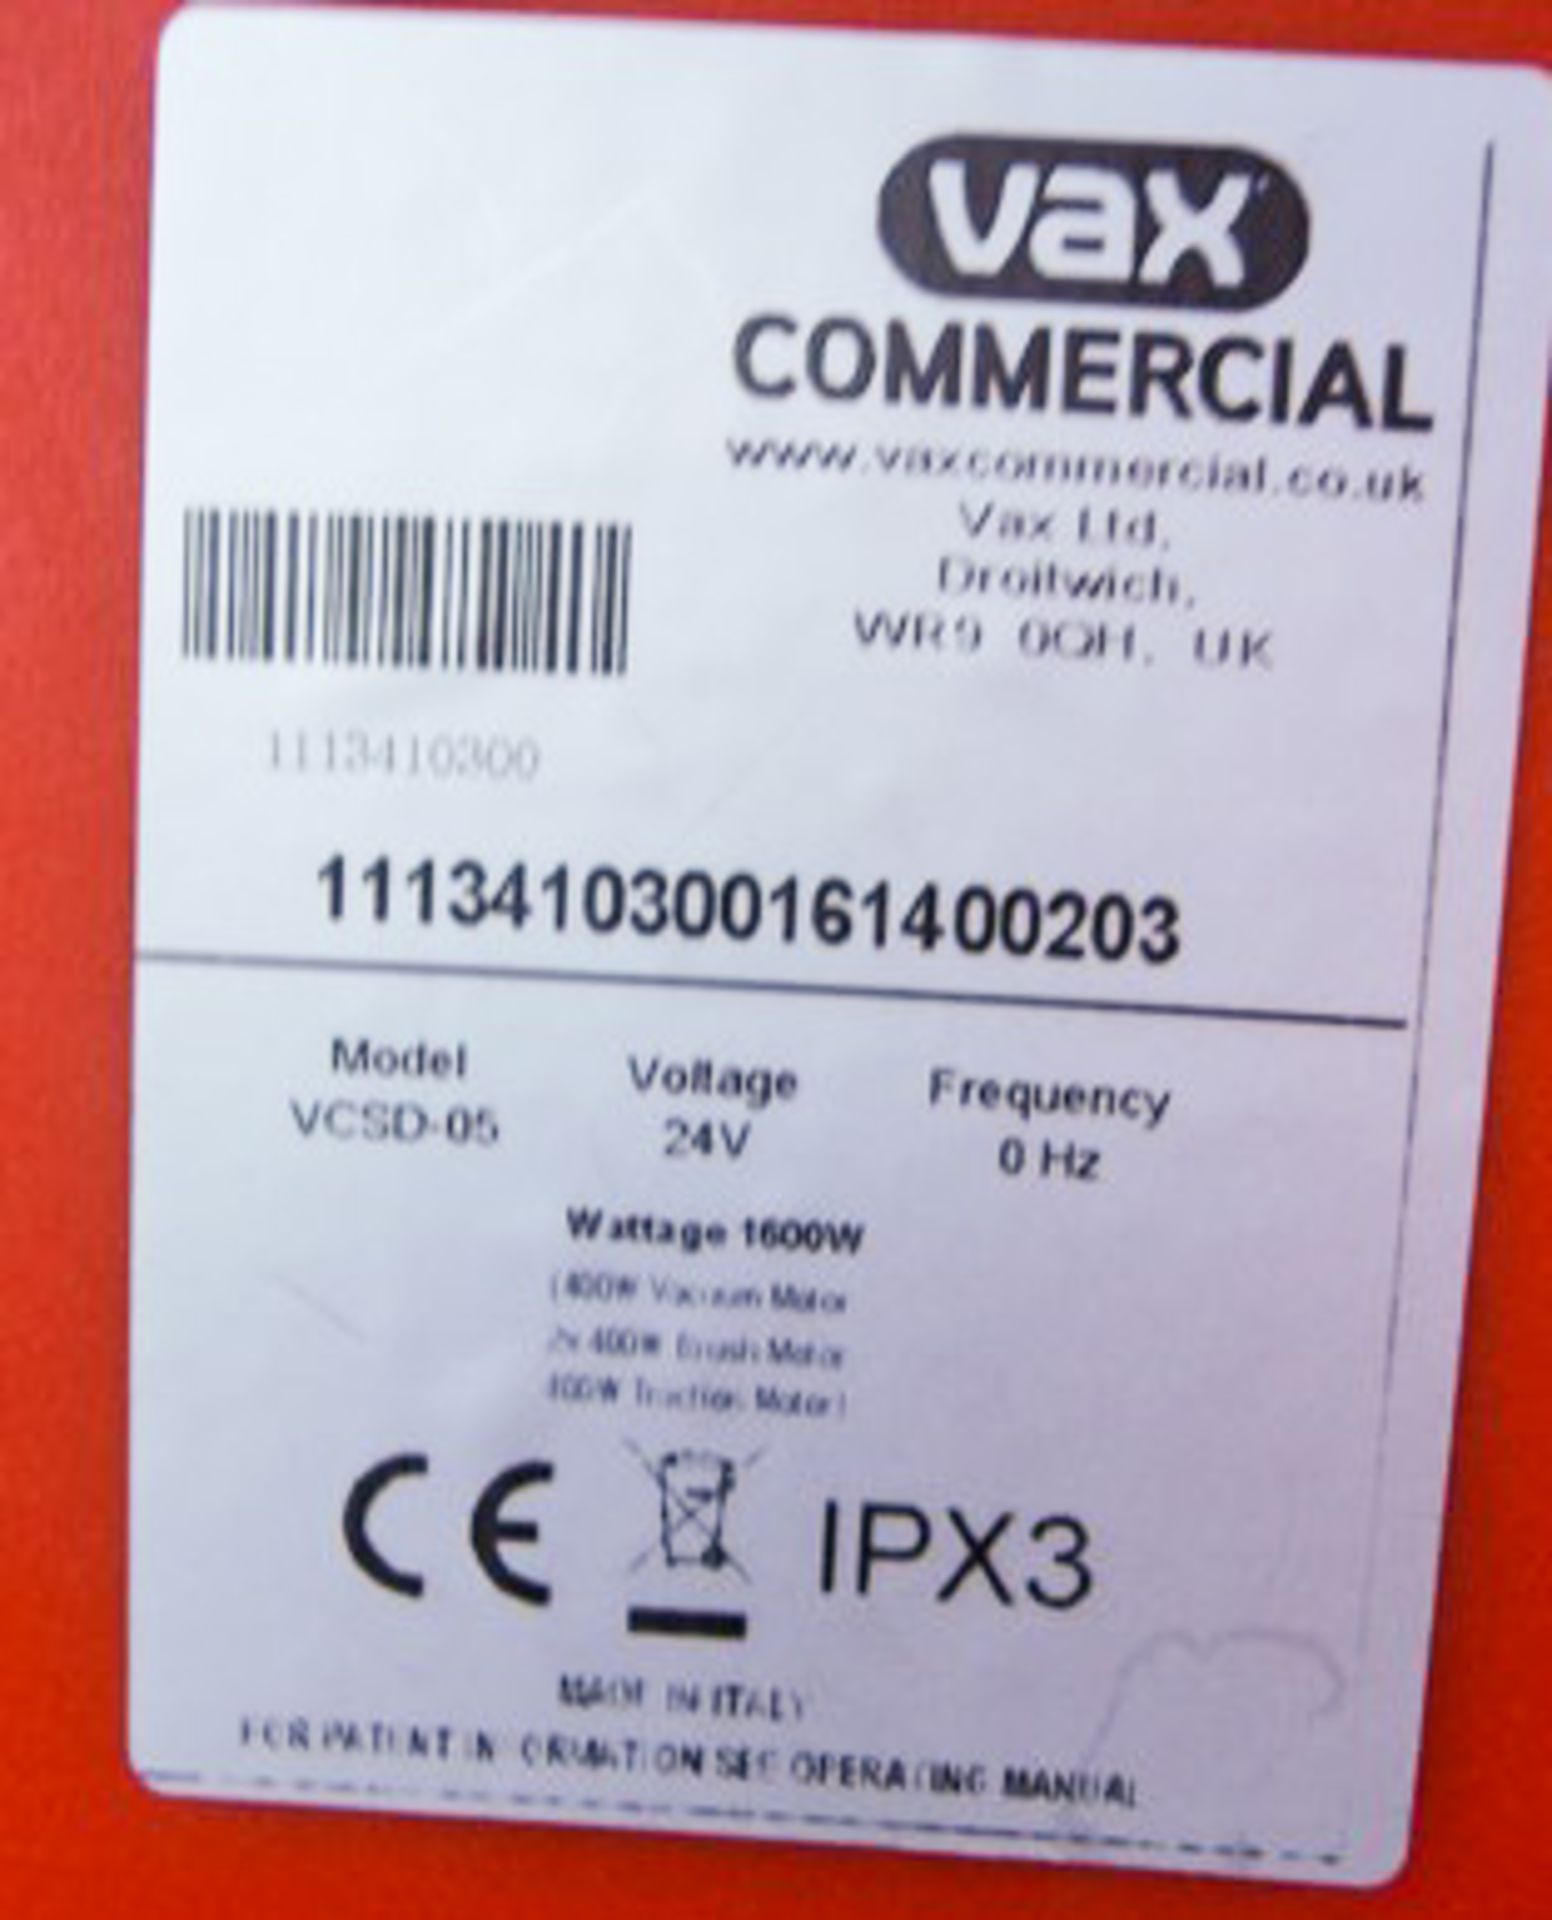 VAX VCSD-05 commercial floor cleaner, mains charger. 123hrs (not verified) - Image 7 of 8